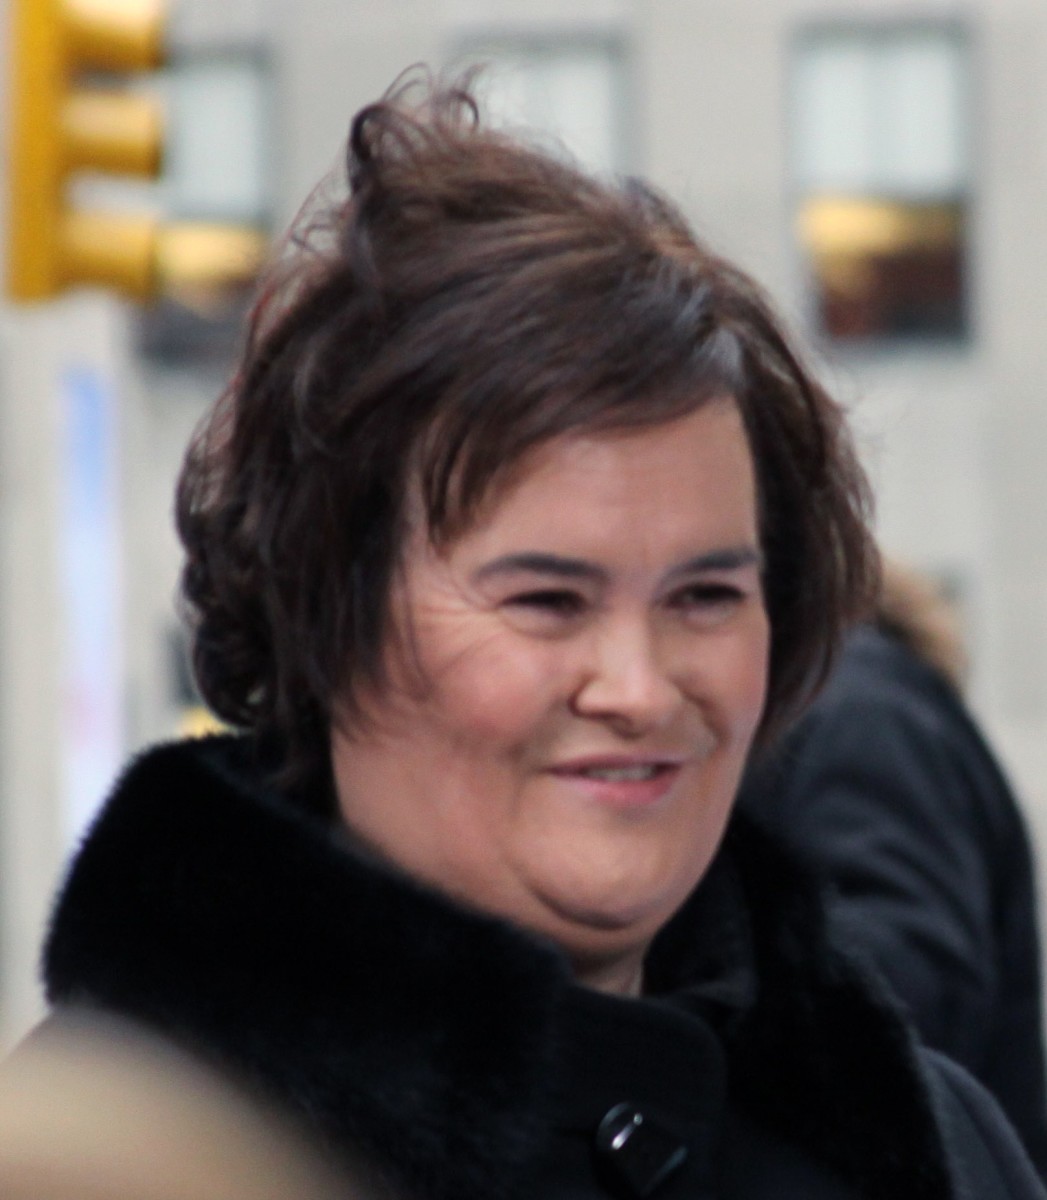 Susan Boyle receives her birthday gift every year on April Fools' Day.